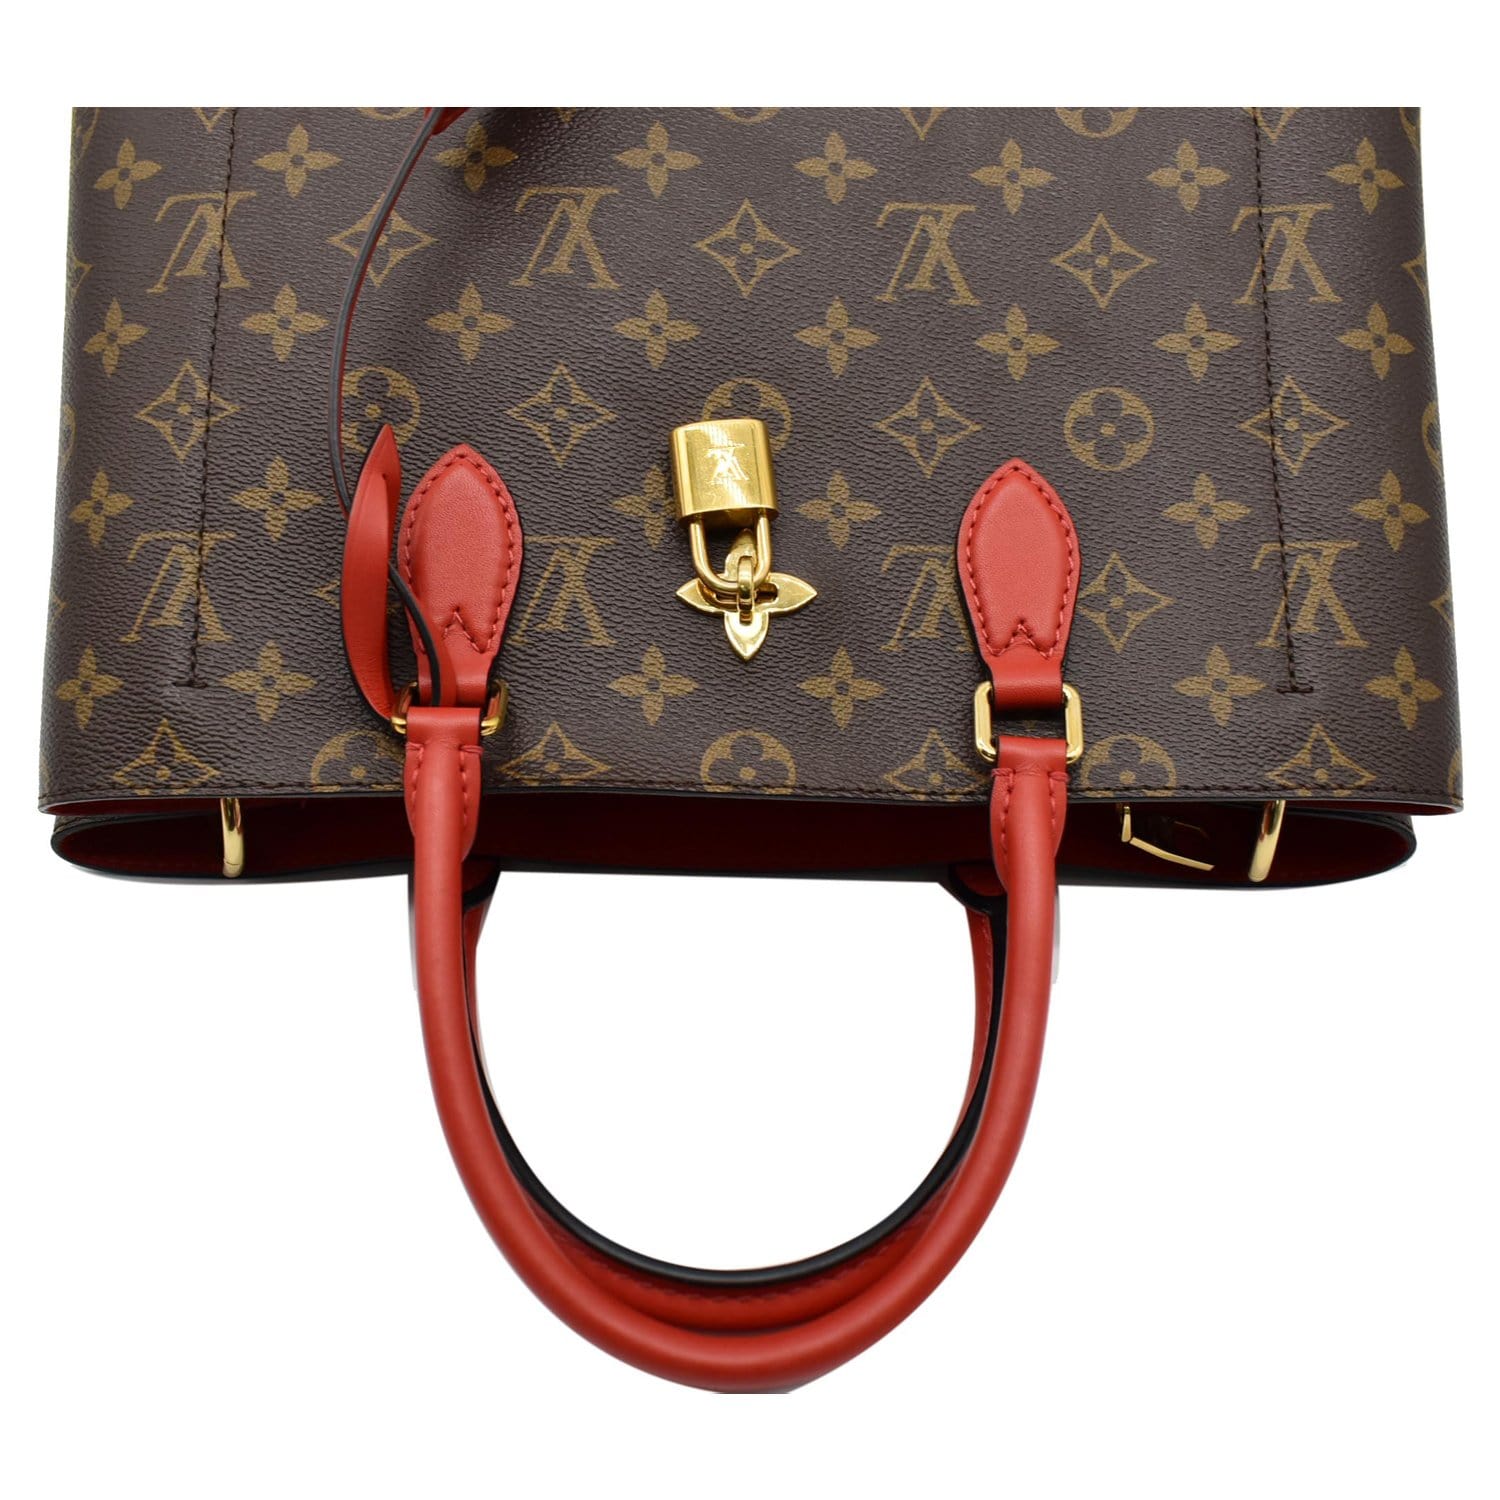 LOUIS VUITTON Monogram / Red Flower Tote – The Luxury Lady